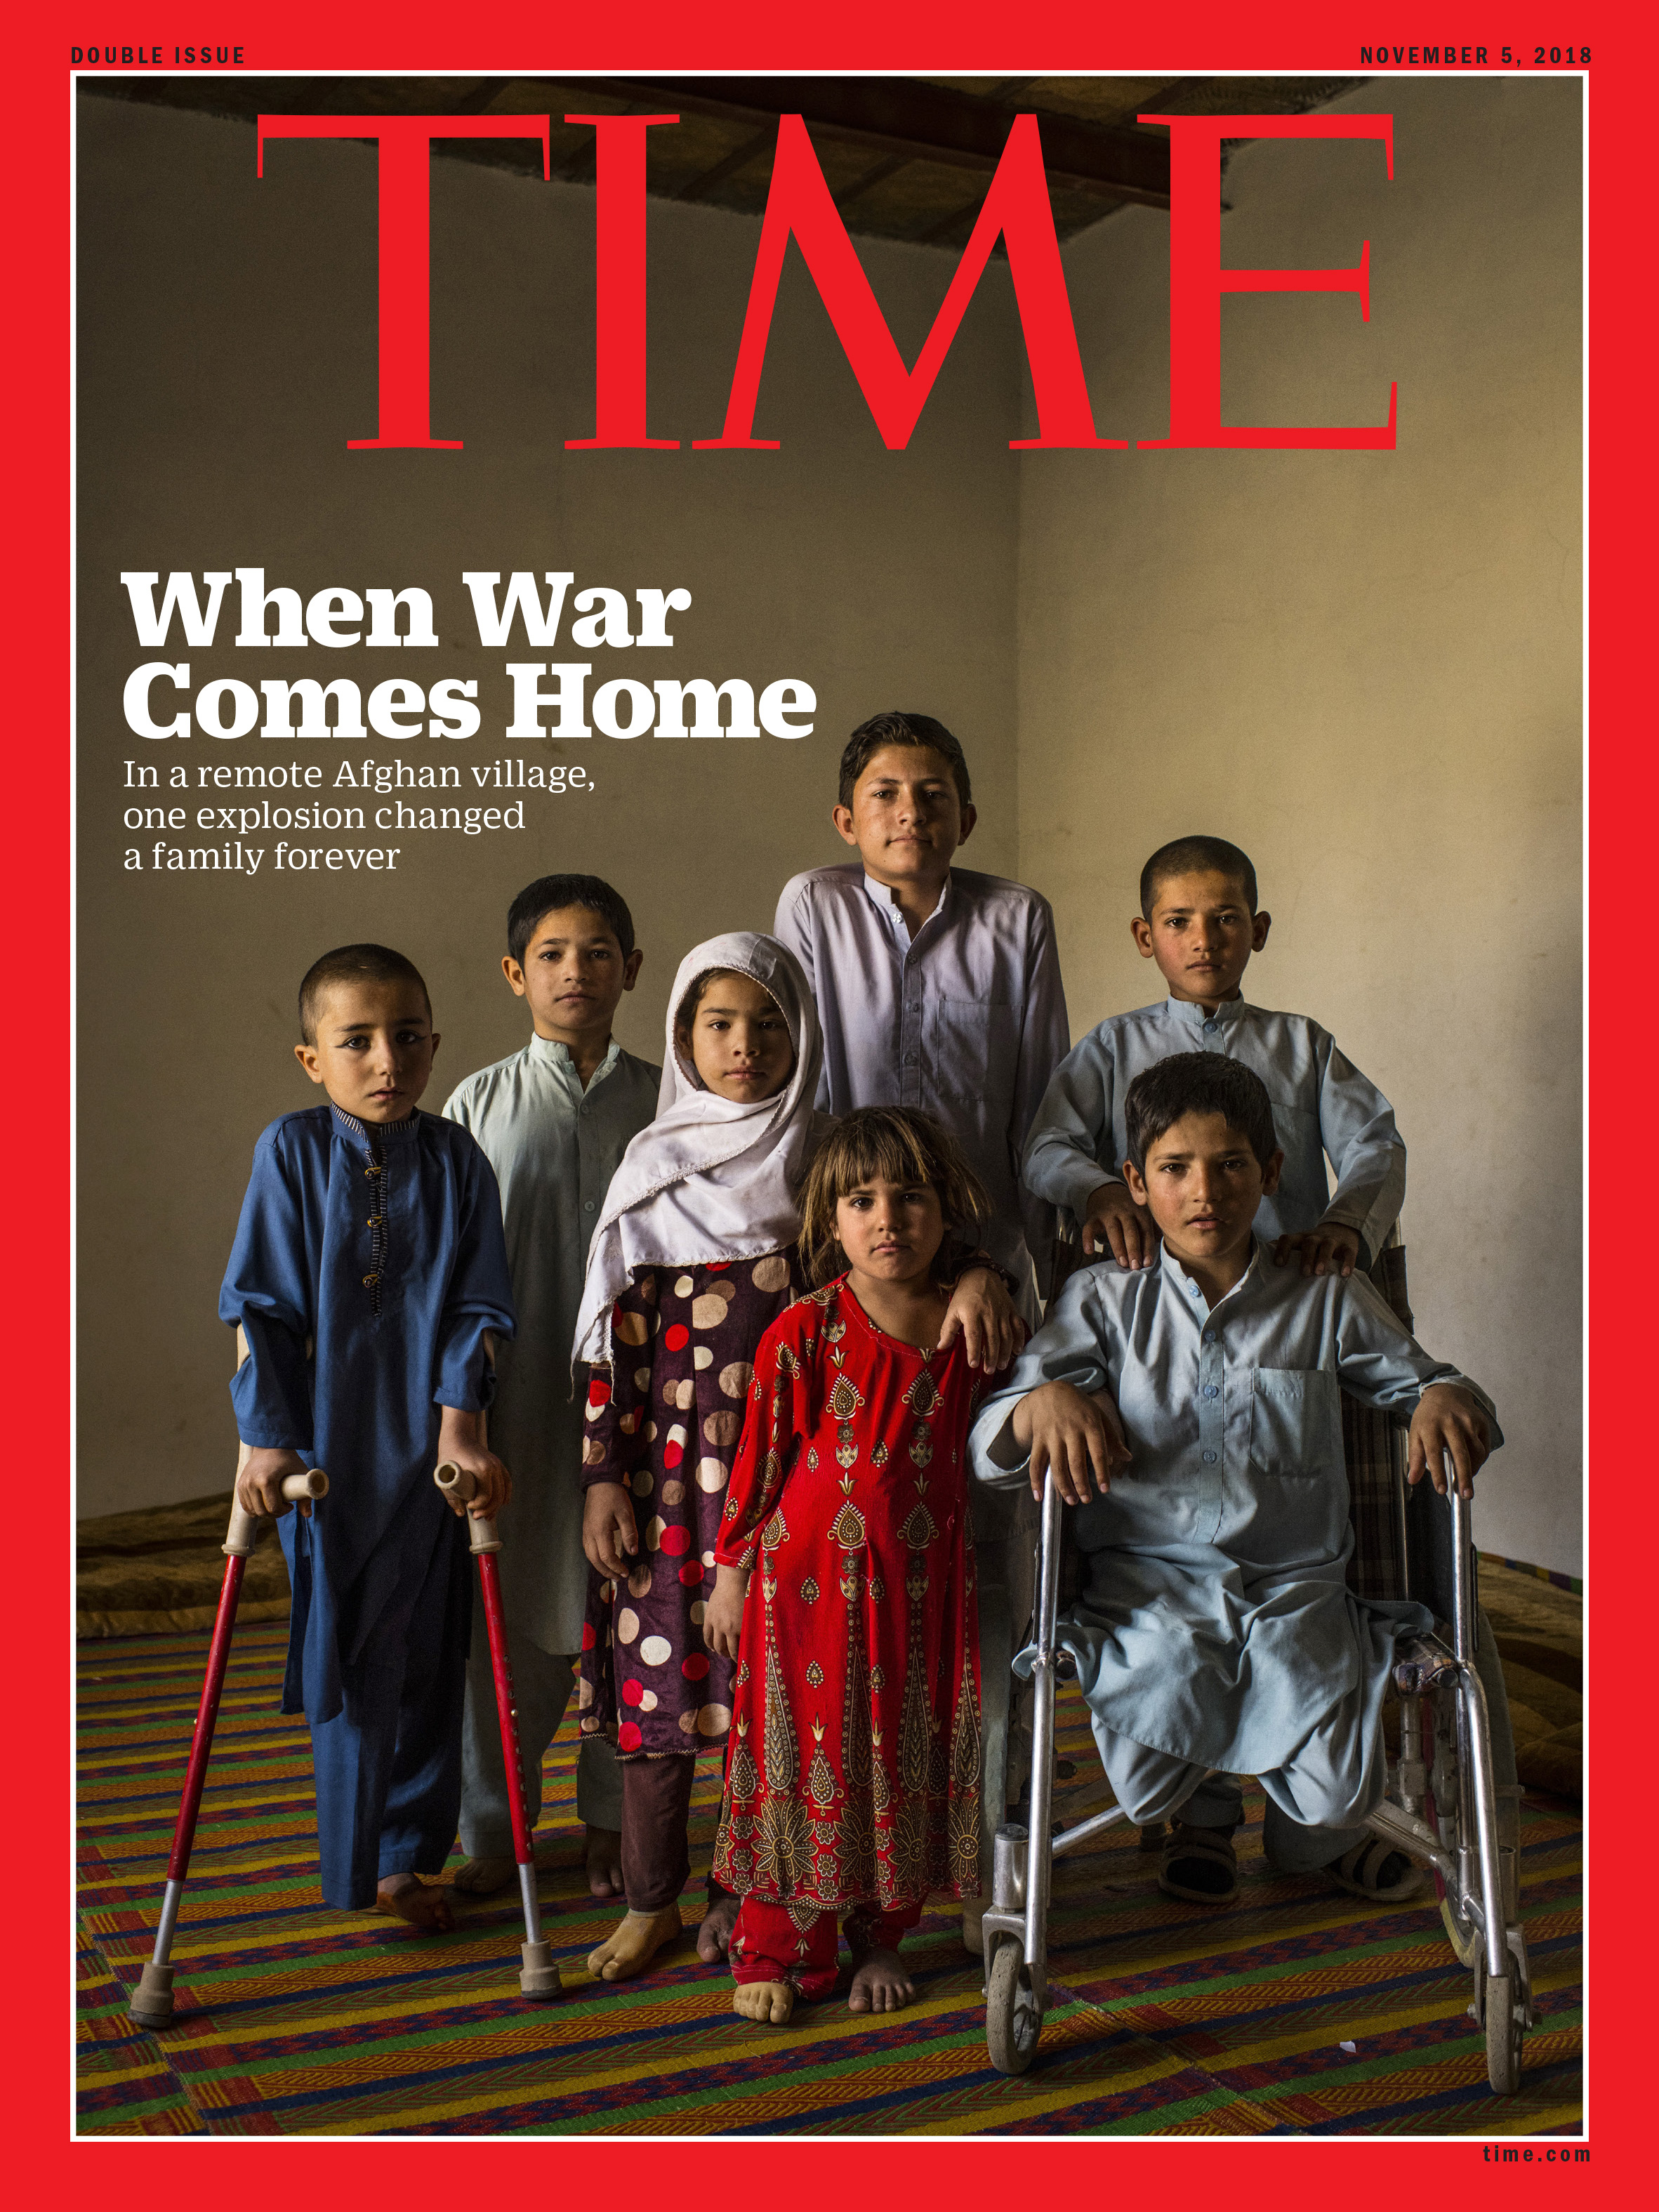 The seven children inside their makeshift home classroom on Oct. 11. From left: Aman, Mangal, Rabia, Marwa, Shafiqullah (at rear), Abdul Rashid (in wheelchair) and his twin Bashir. Abdul Rashid, who aggravated one of his wounds while wrestling with his brothers, was the only one yet to be fitted for prostheses. Aman was waiting for his to be repaired, after breaking it while playing. (Andrew Quilty for TIME)